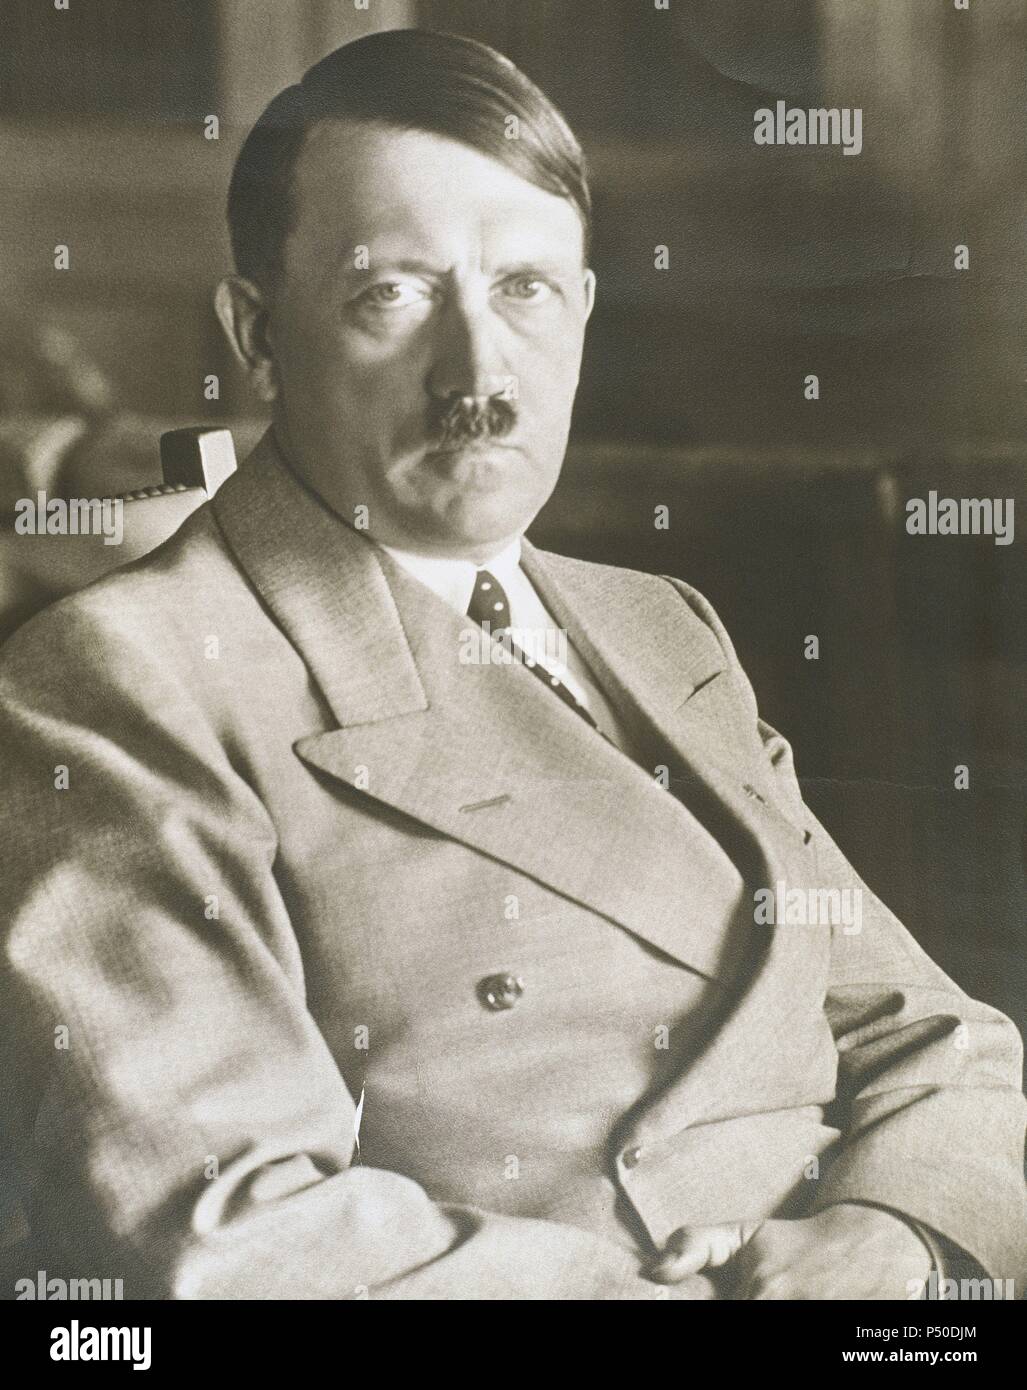 Adolf Hitler (1889-1945). Leader of the National Socialist German Workers Party. Photography. Stock Photo